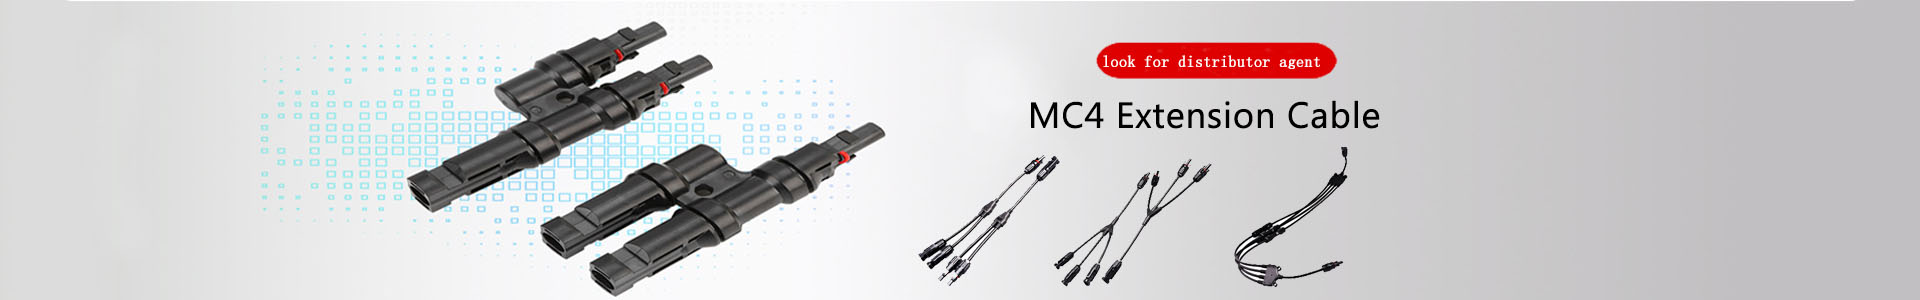 MC4 Fuse Connector-Diode Fuse Connector-Solar | solar connector,solar branch connector,diode fuse connector,MC4 extnsion cable,H1Z2Z2 solar cable, UL4703 solar cable | Leading manufacturer and supplier of solar pv cables and connectors